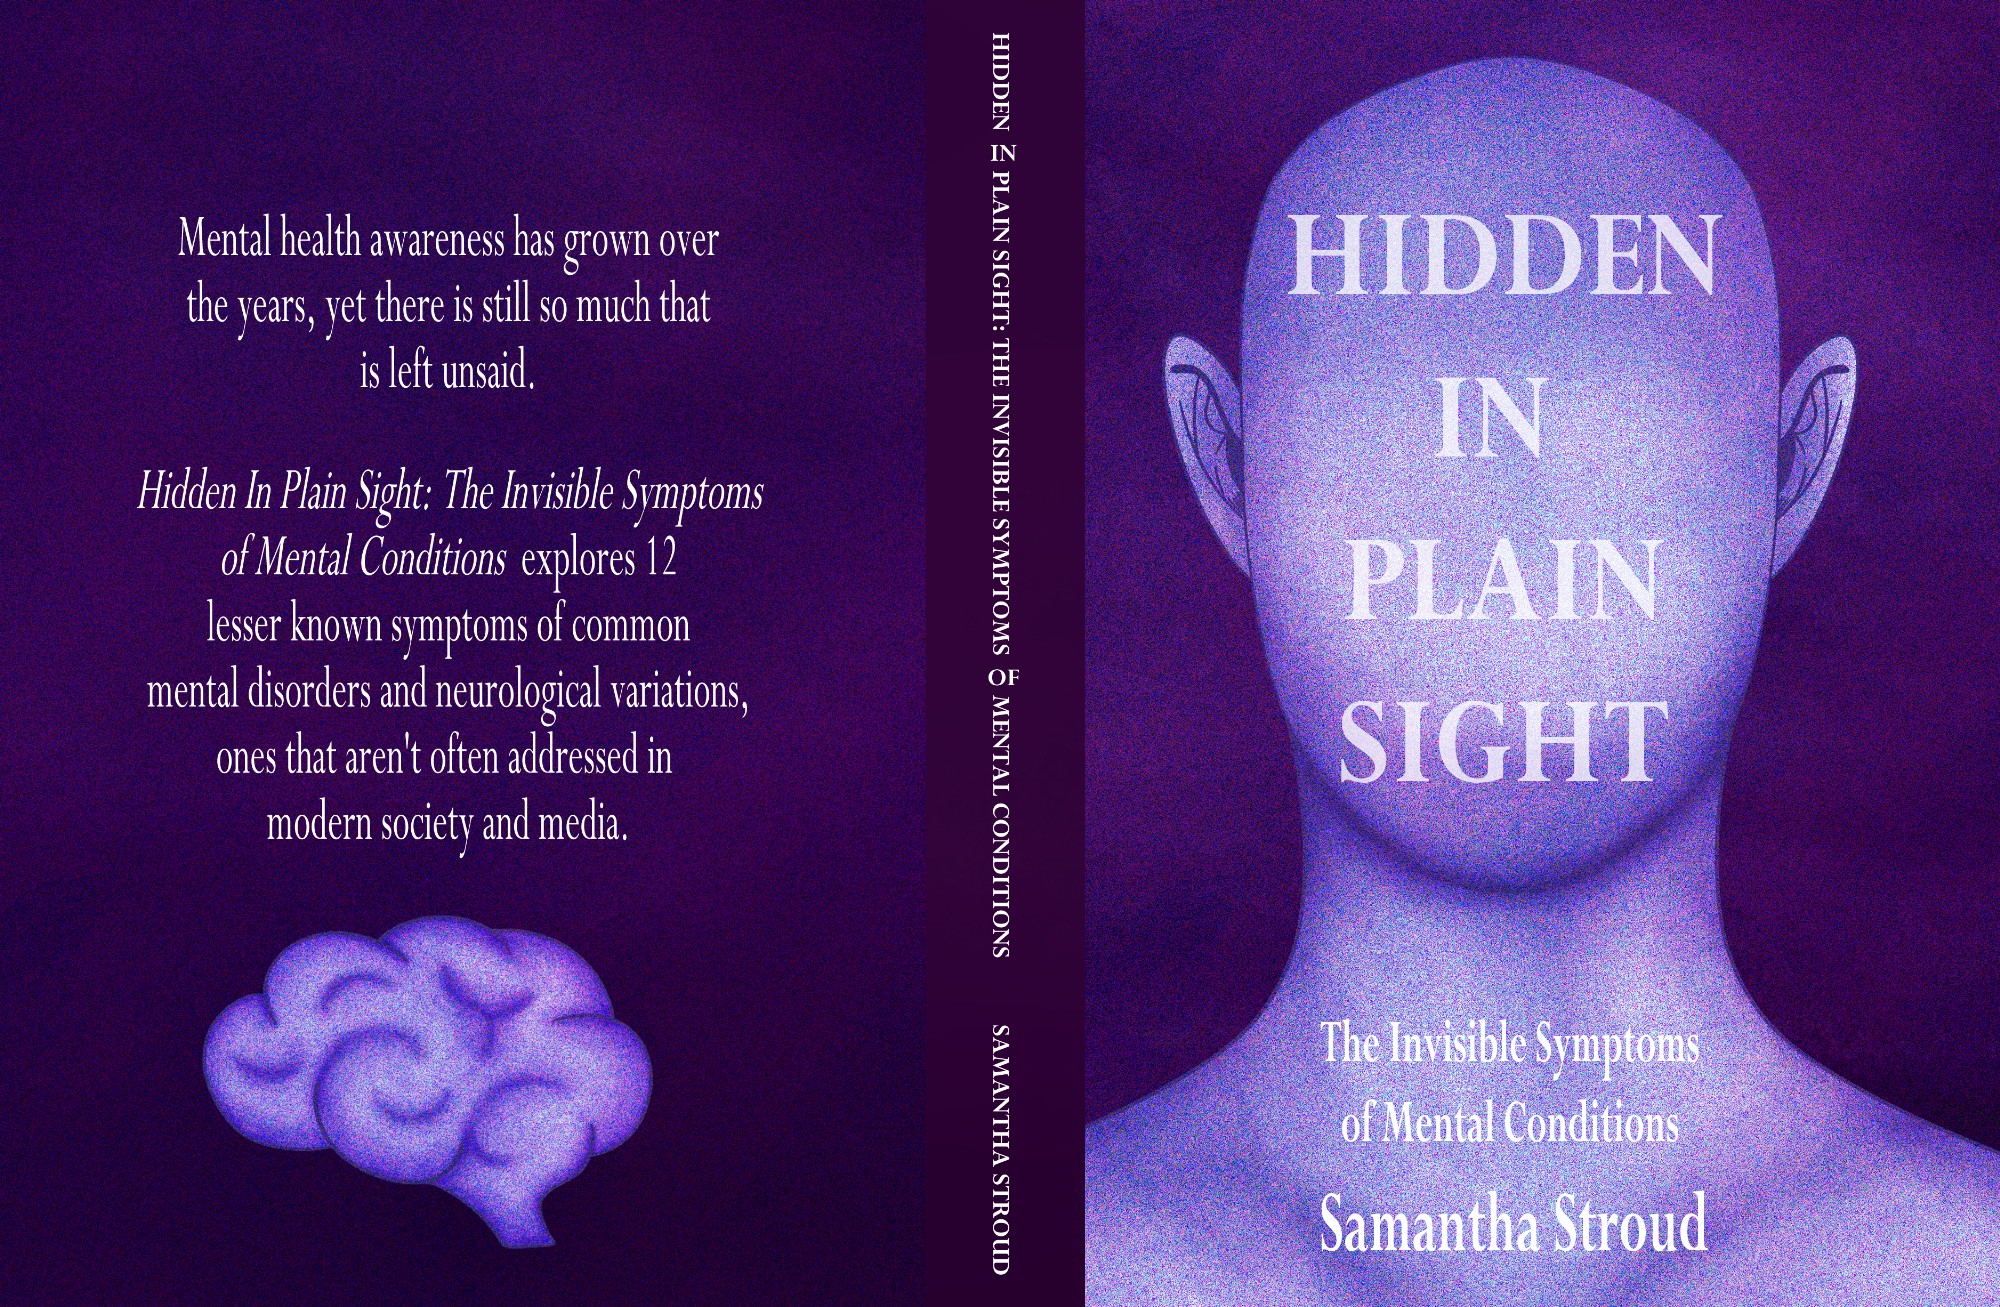 The book cover for my mental health book called ‘Hidden in Plain Sight: The Invisible Symptoms of Mental Conditions’, which was part of my Final Major Project. Samantha Stroud